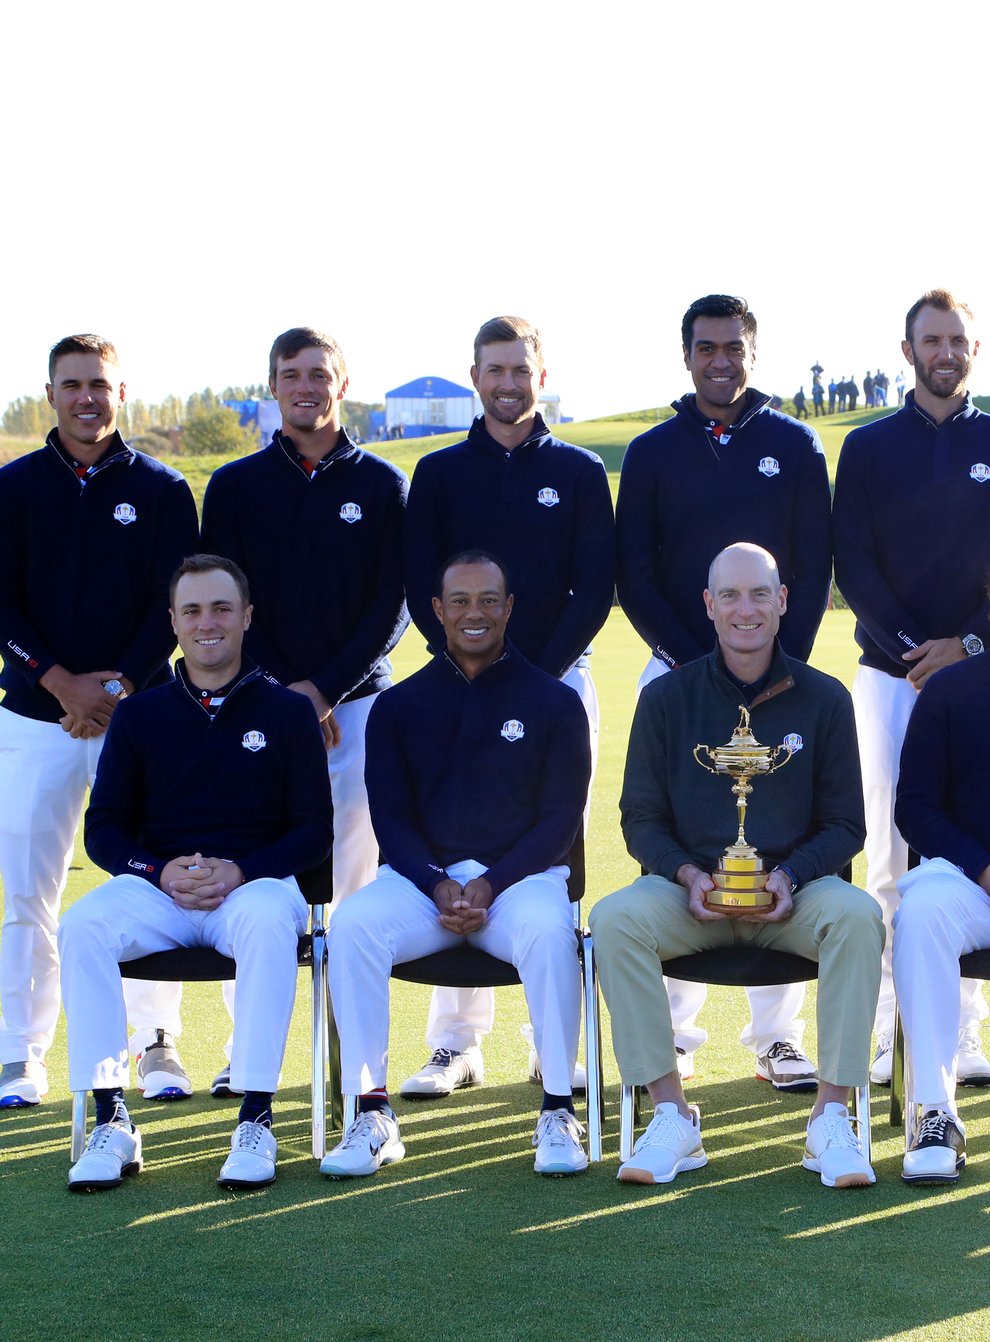 Ryder Cup team-mates Bryson DeChambeau (back row, 2nd left) and Dustin Johnson (back row, 5th left) have committed themselves to the PGA Tour (Gareth Fuller/PA)